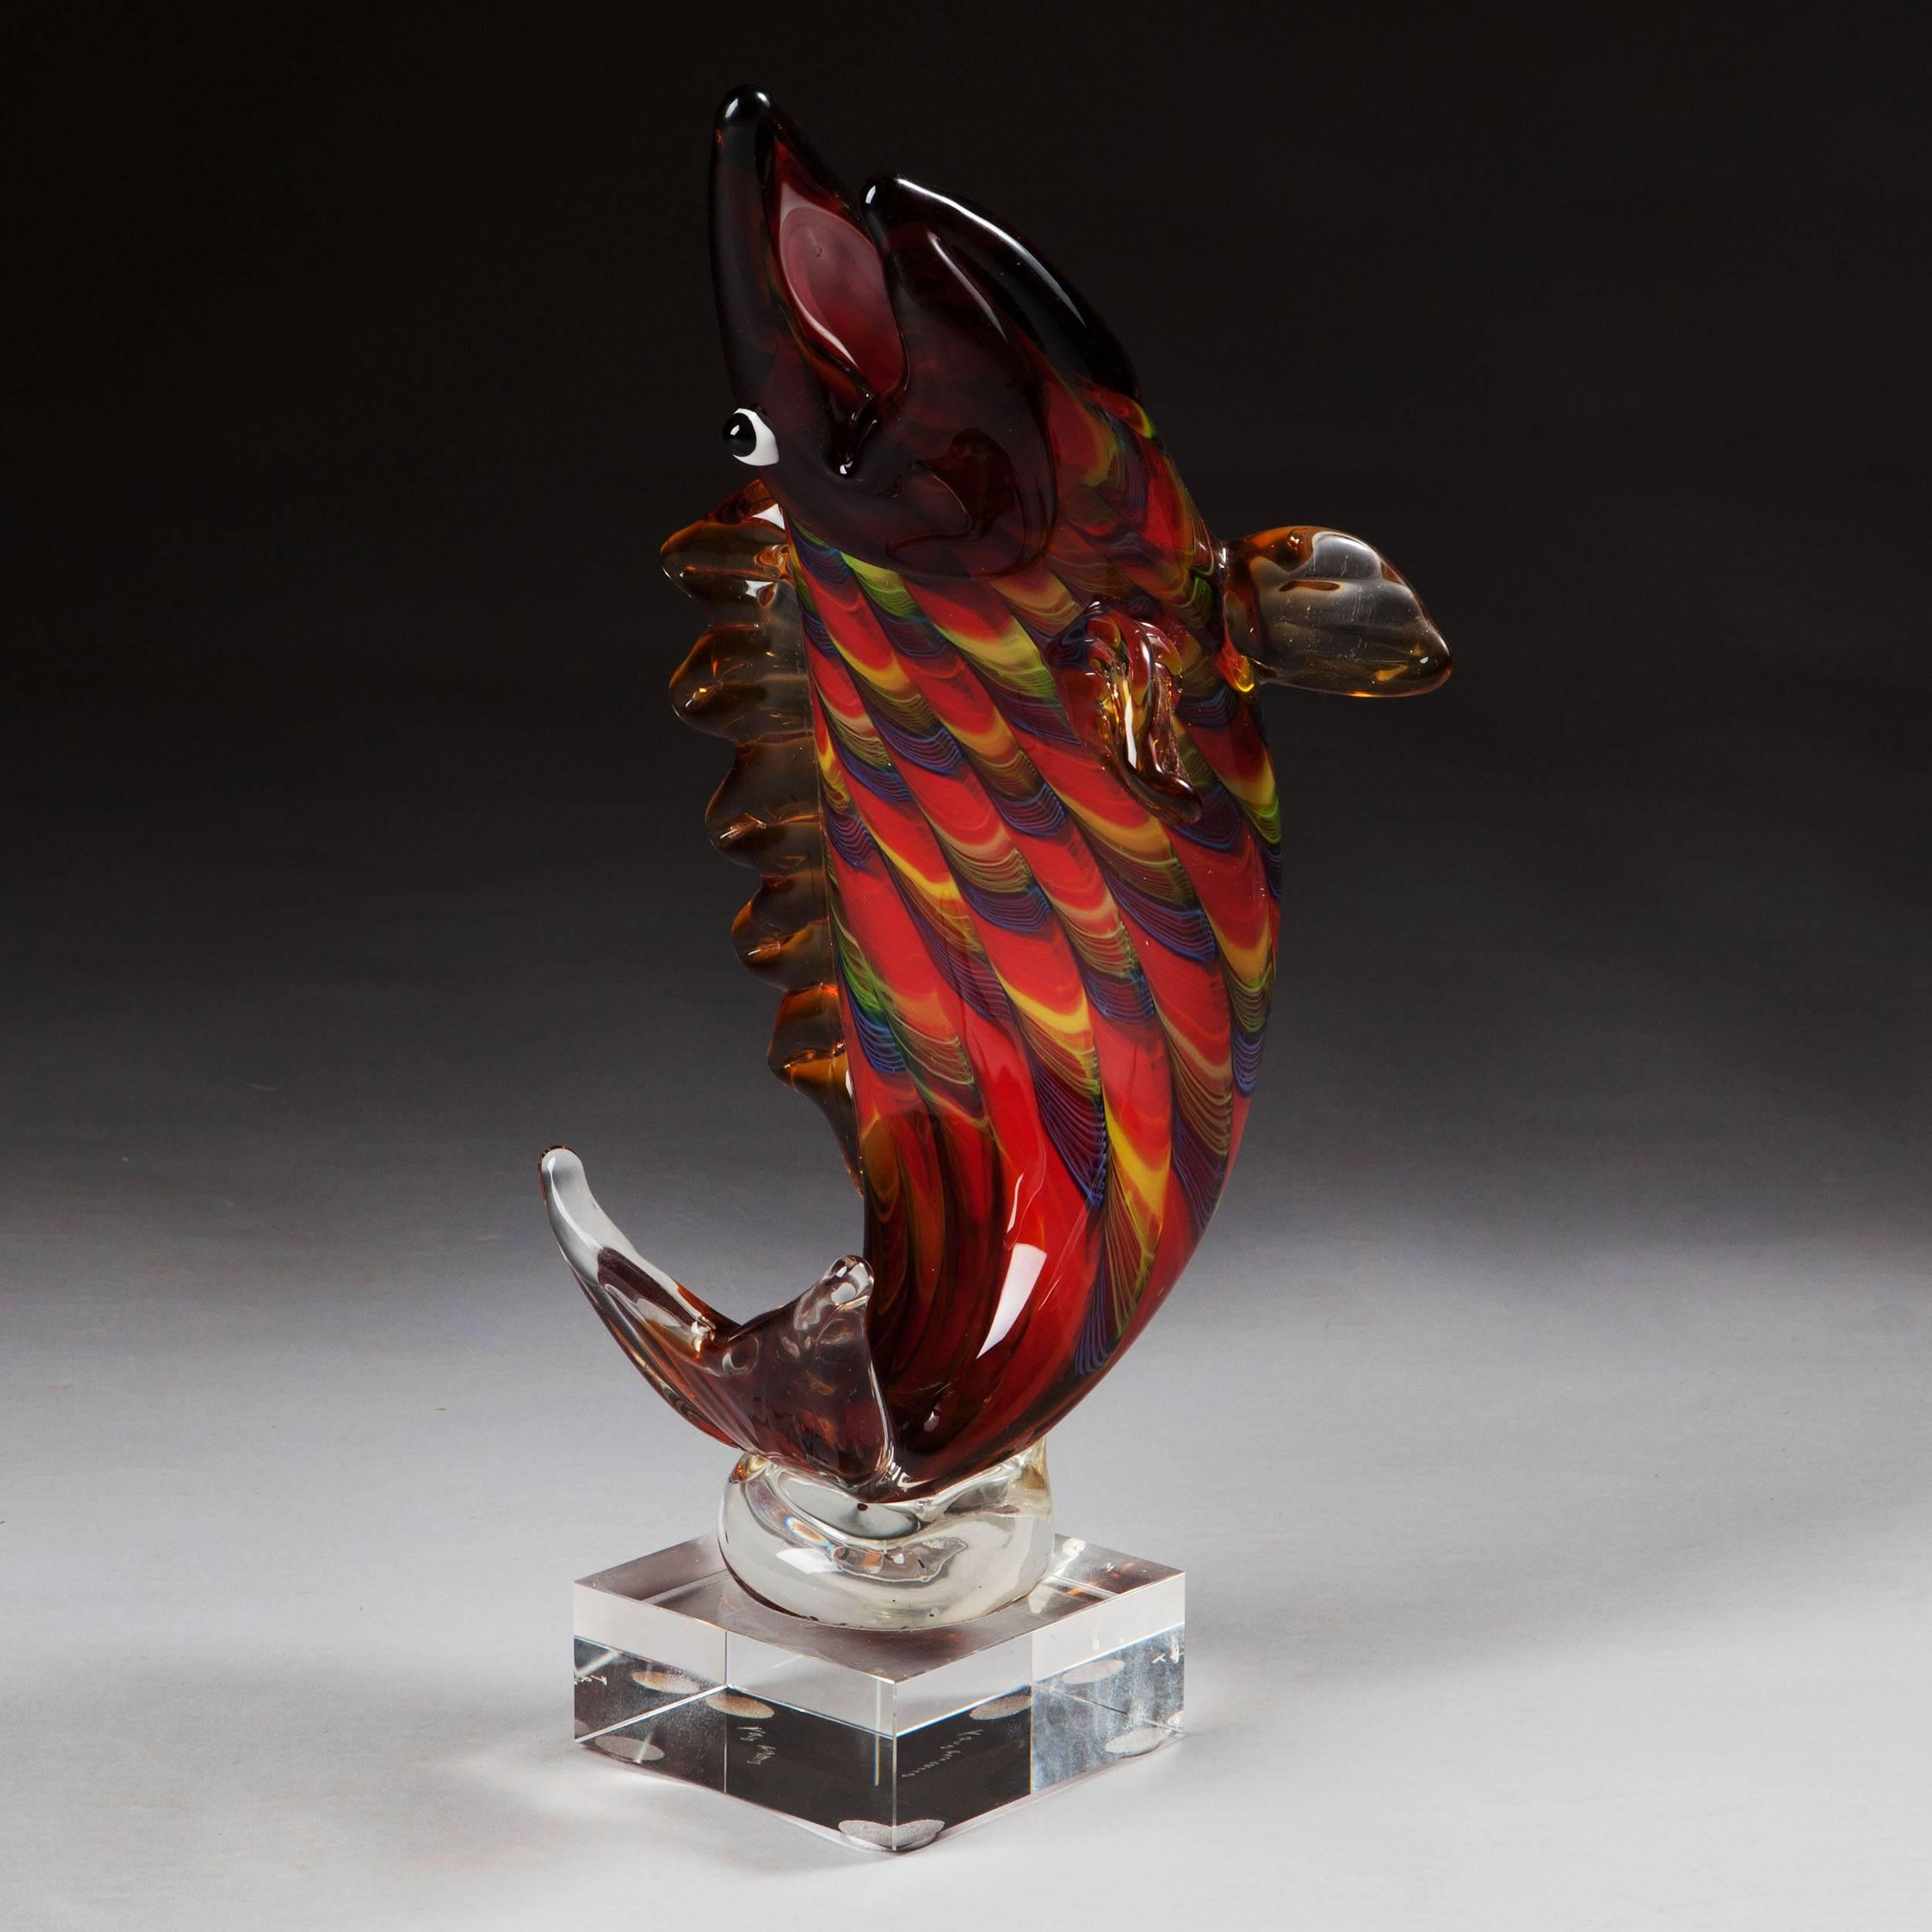 Italy, Murano, 20th century.

A fine 20th-century colourful handmade glass statue of a leaping salmon, mouth open and eyes prominent.

Height 16 inches .
Width 6 inches .
Depth 6 inches.